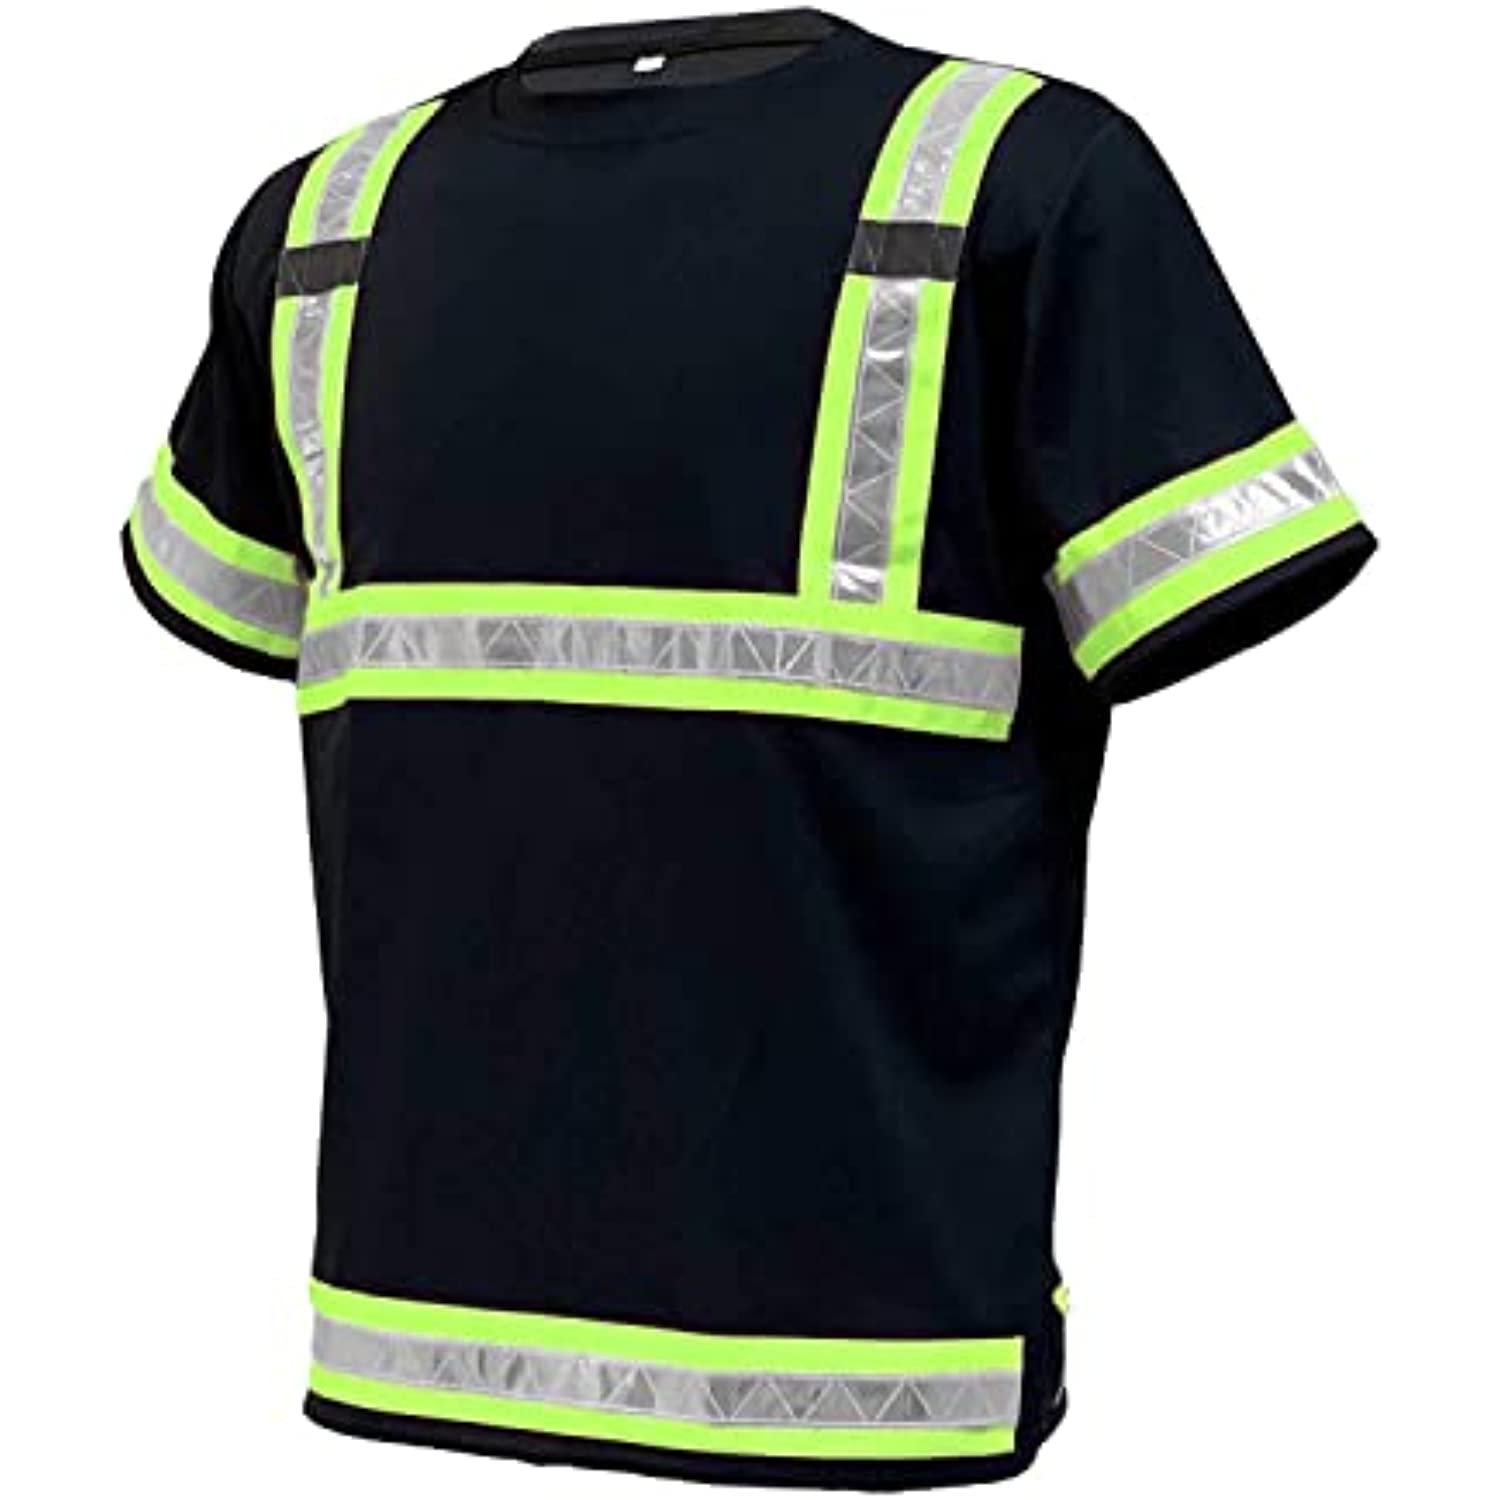 Reflective Safety Work Shirts for Men - High Visibility Short Sleeve T Shirts ANSI Class 3 Gear with Reflective Tape